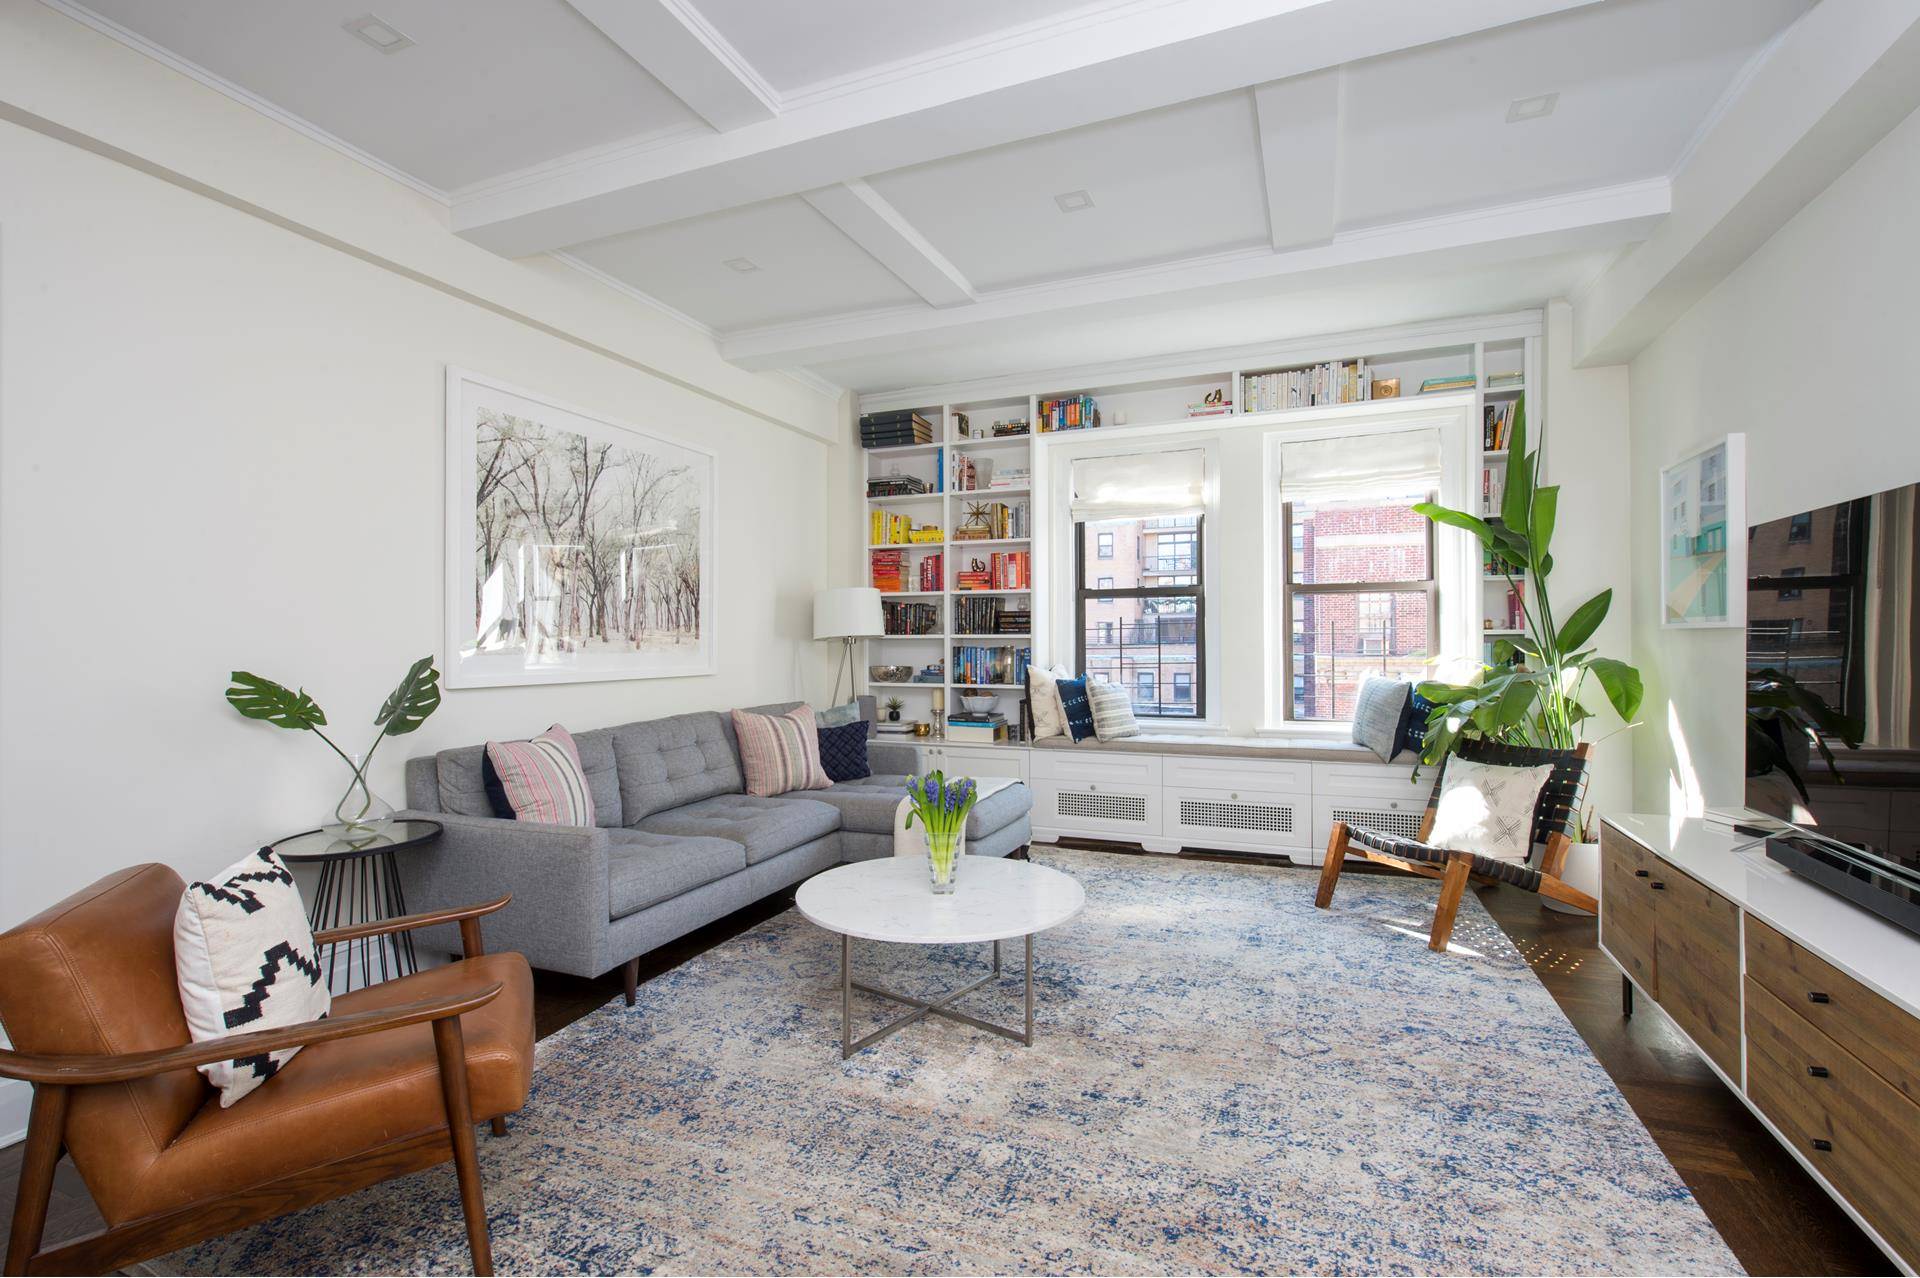 Move right into this stunning and spacious 2 bedroom 2 bathroom home recently renovated with a modern, yet elegant renovation that complements the charming, prewar character of the home.